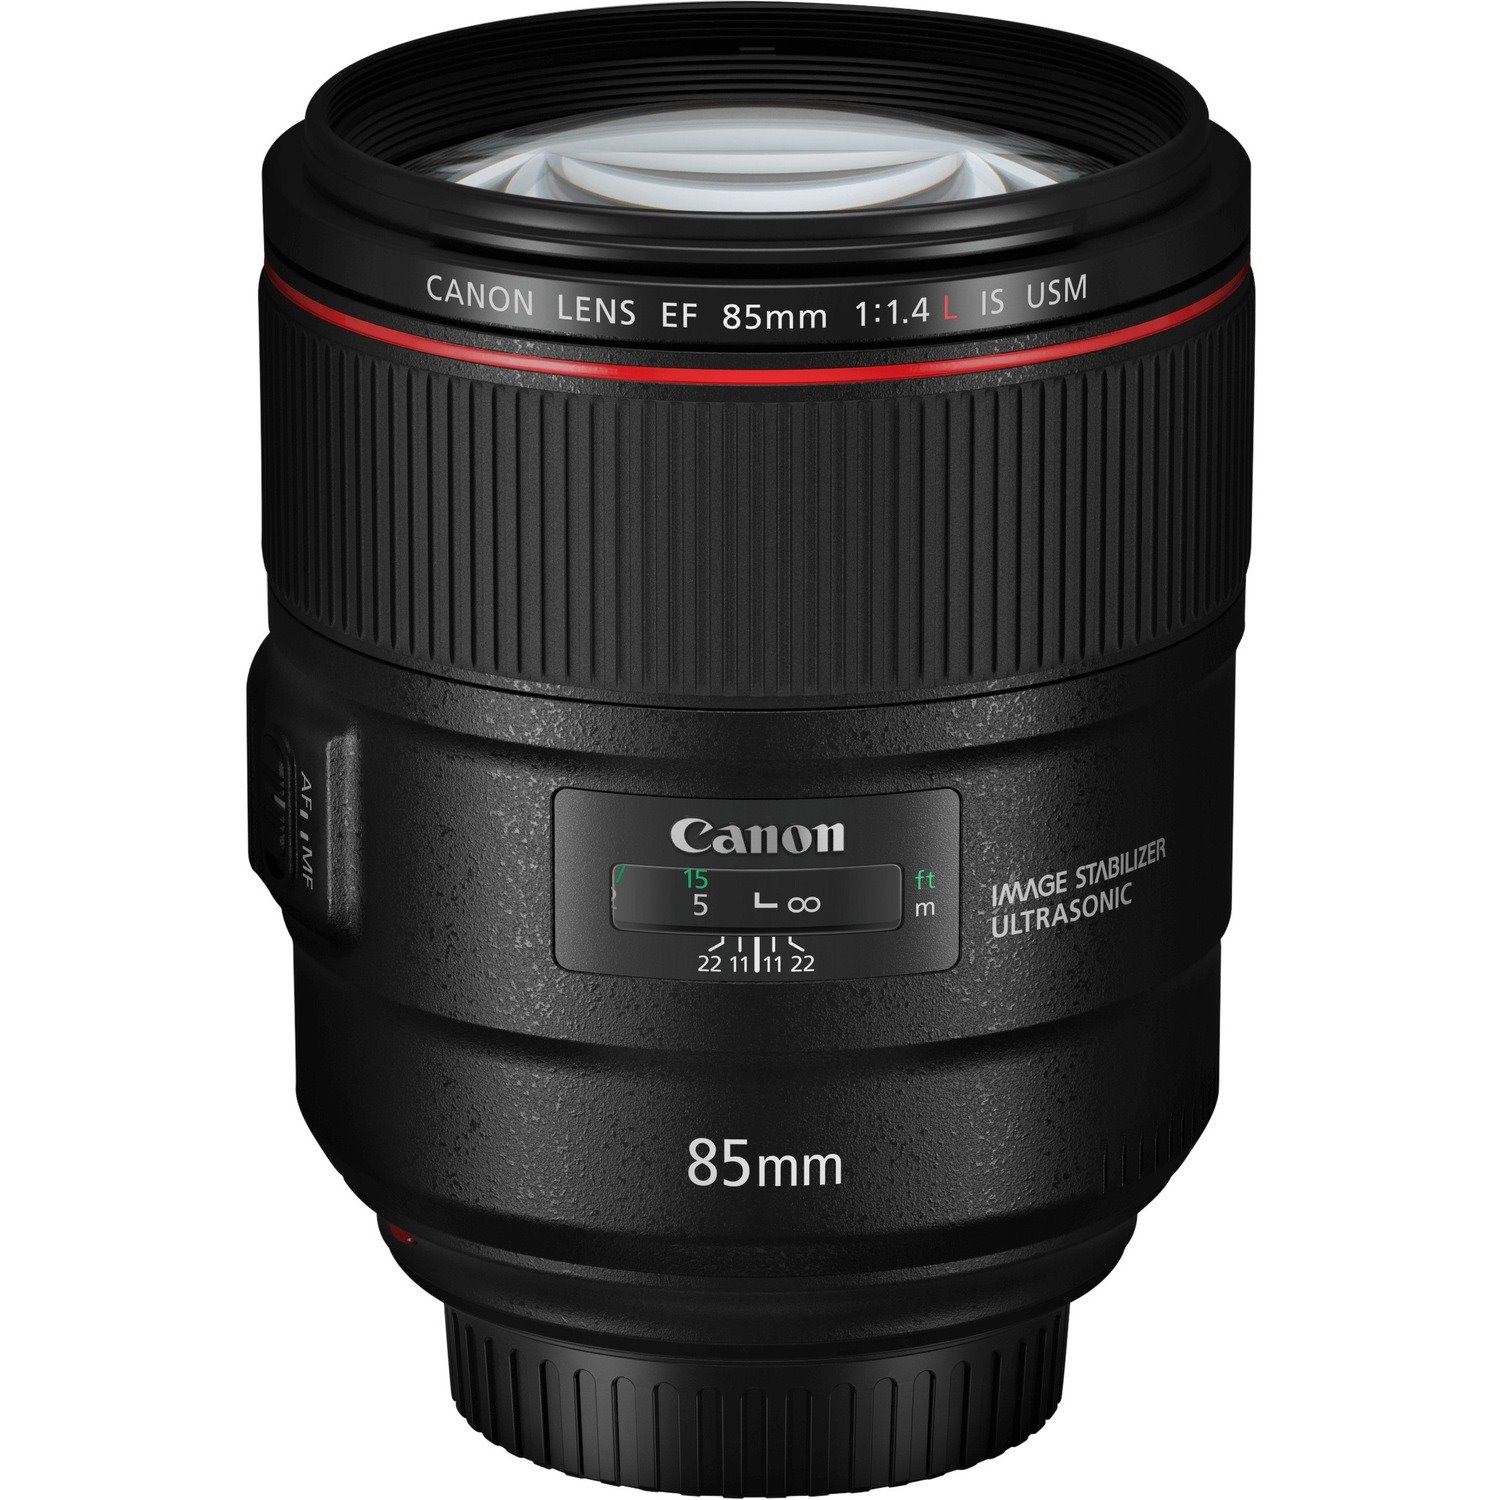 Canon - 85 mm - f/1.4 - Fixed Lens for Canon EF